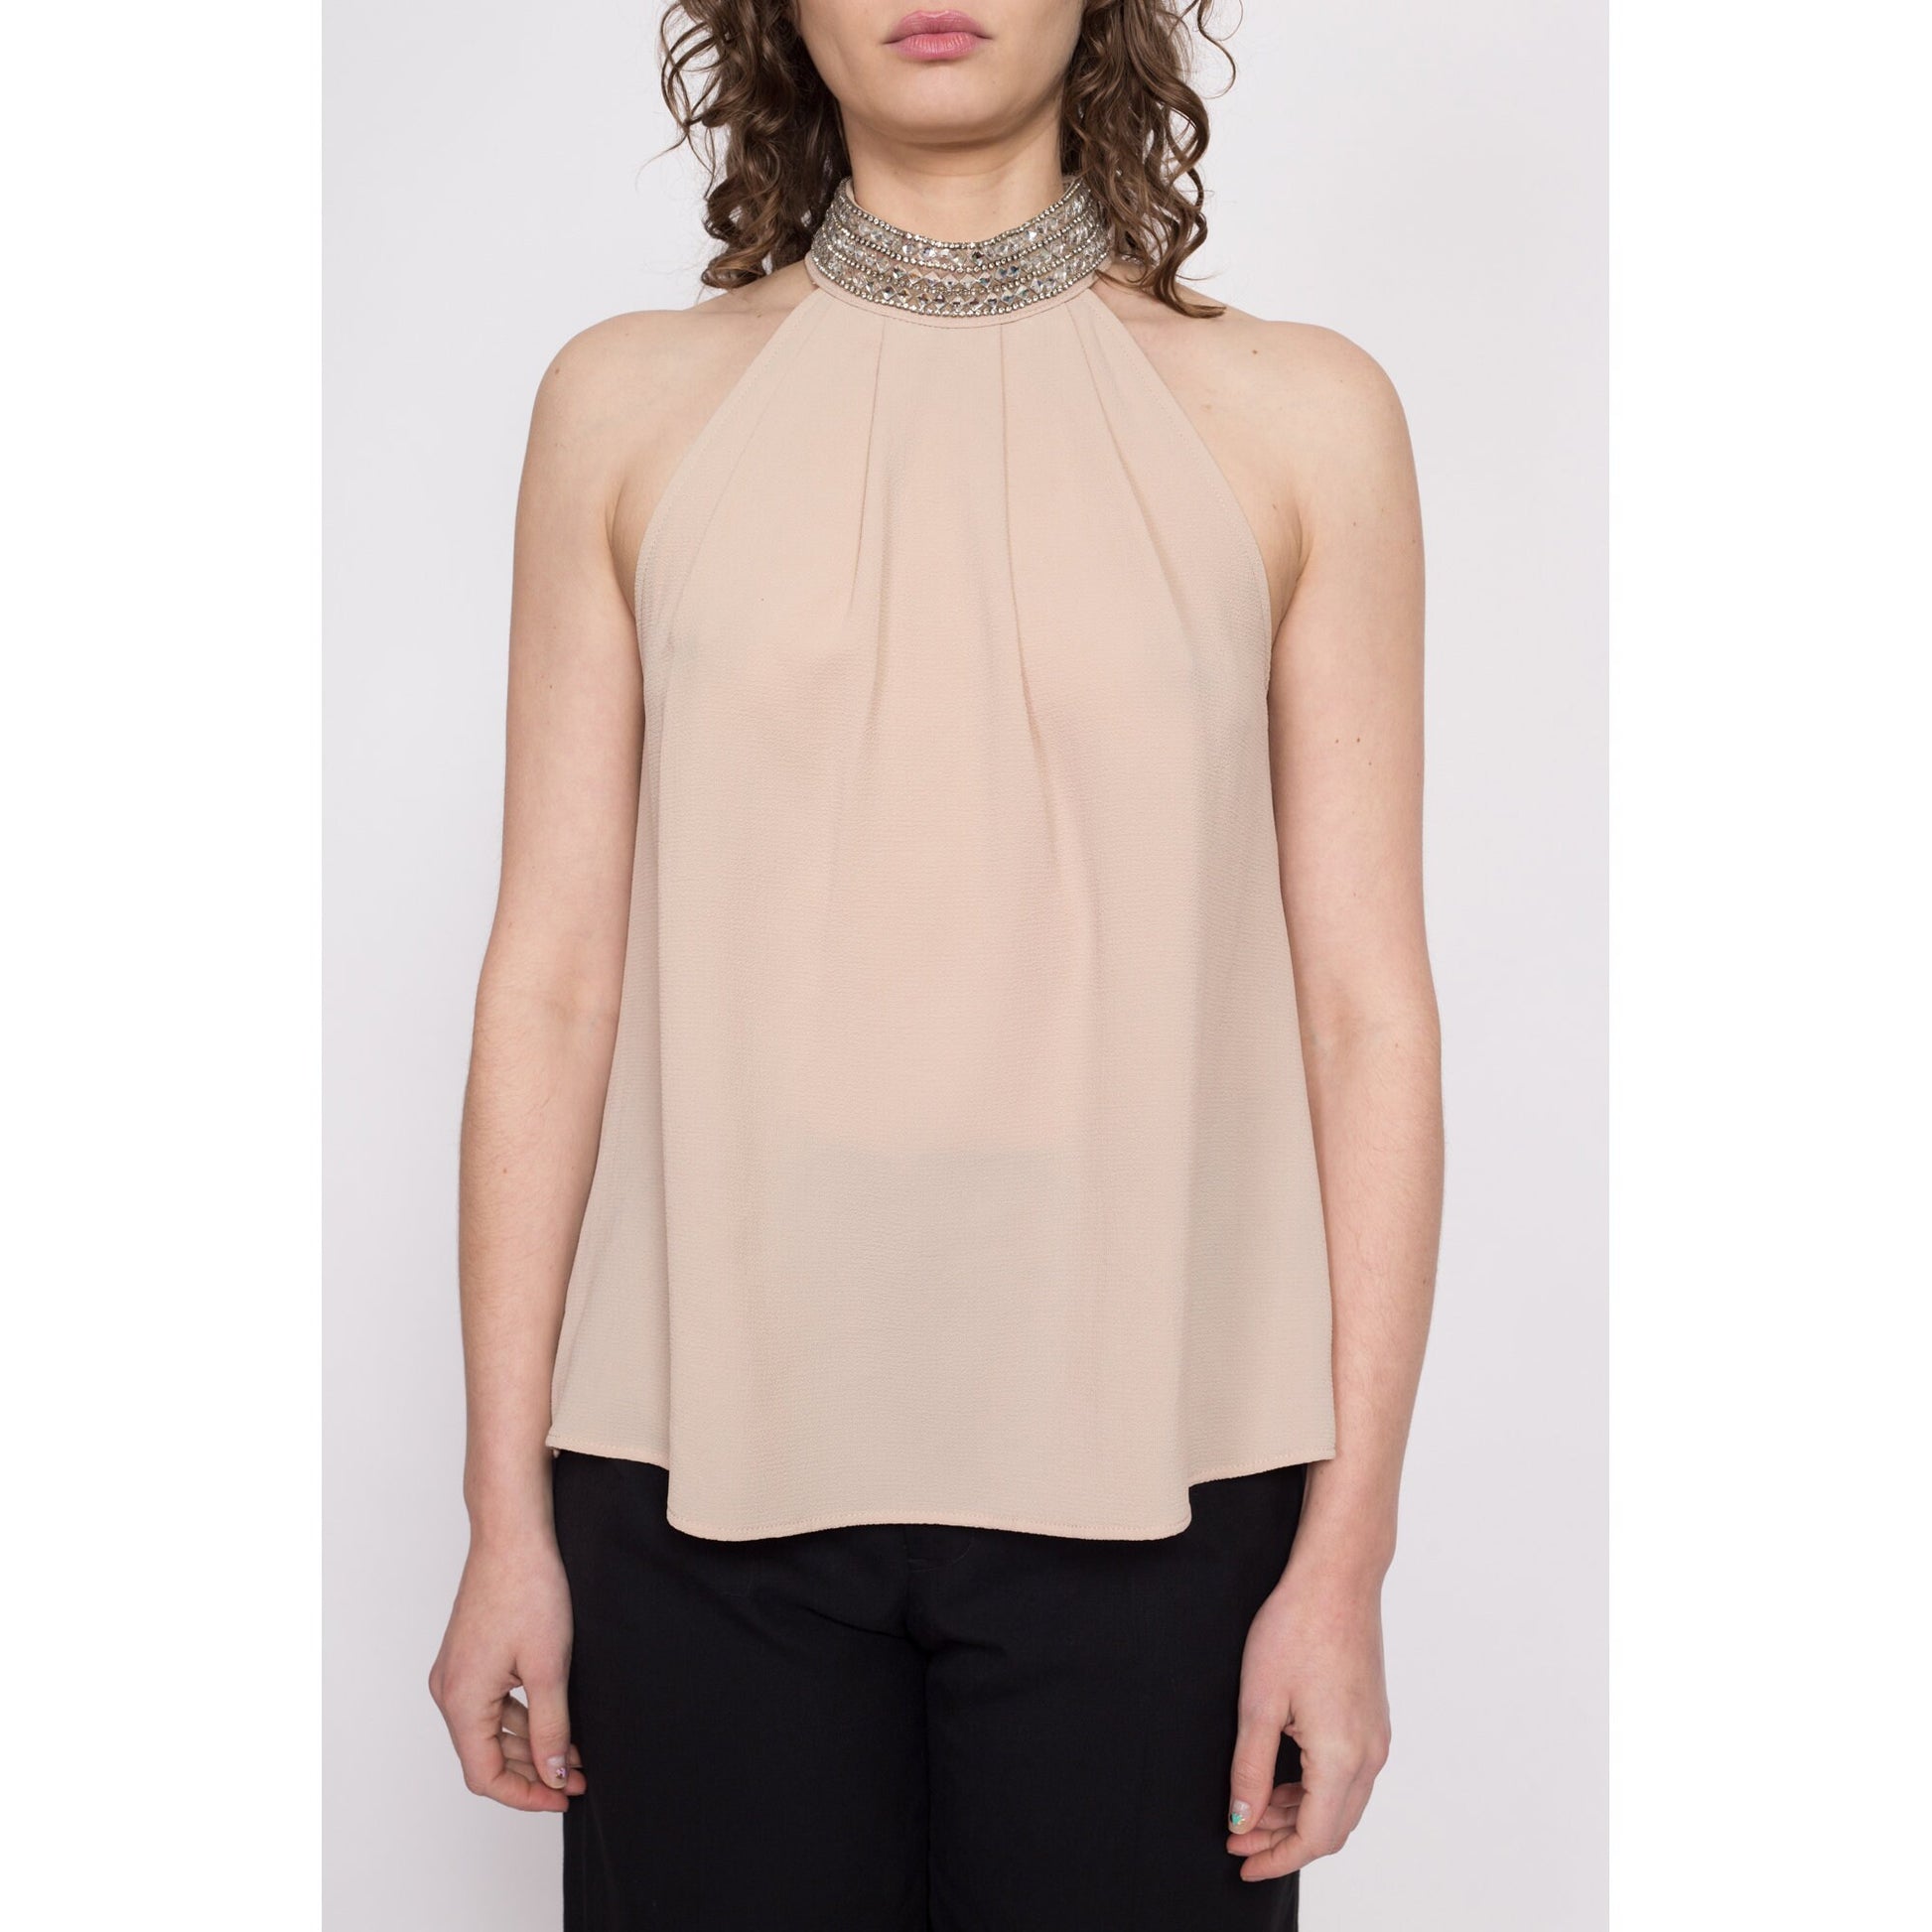 Y2K Nude Jeweled Neck Racerback Top - Small | Vintage Lightweight Flowy Sleeveless High Neck Shirt